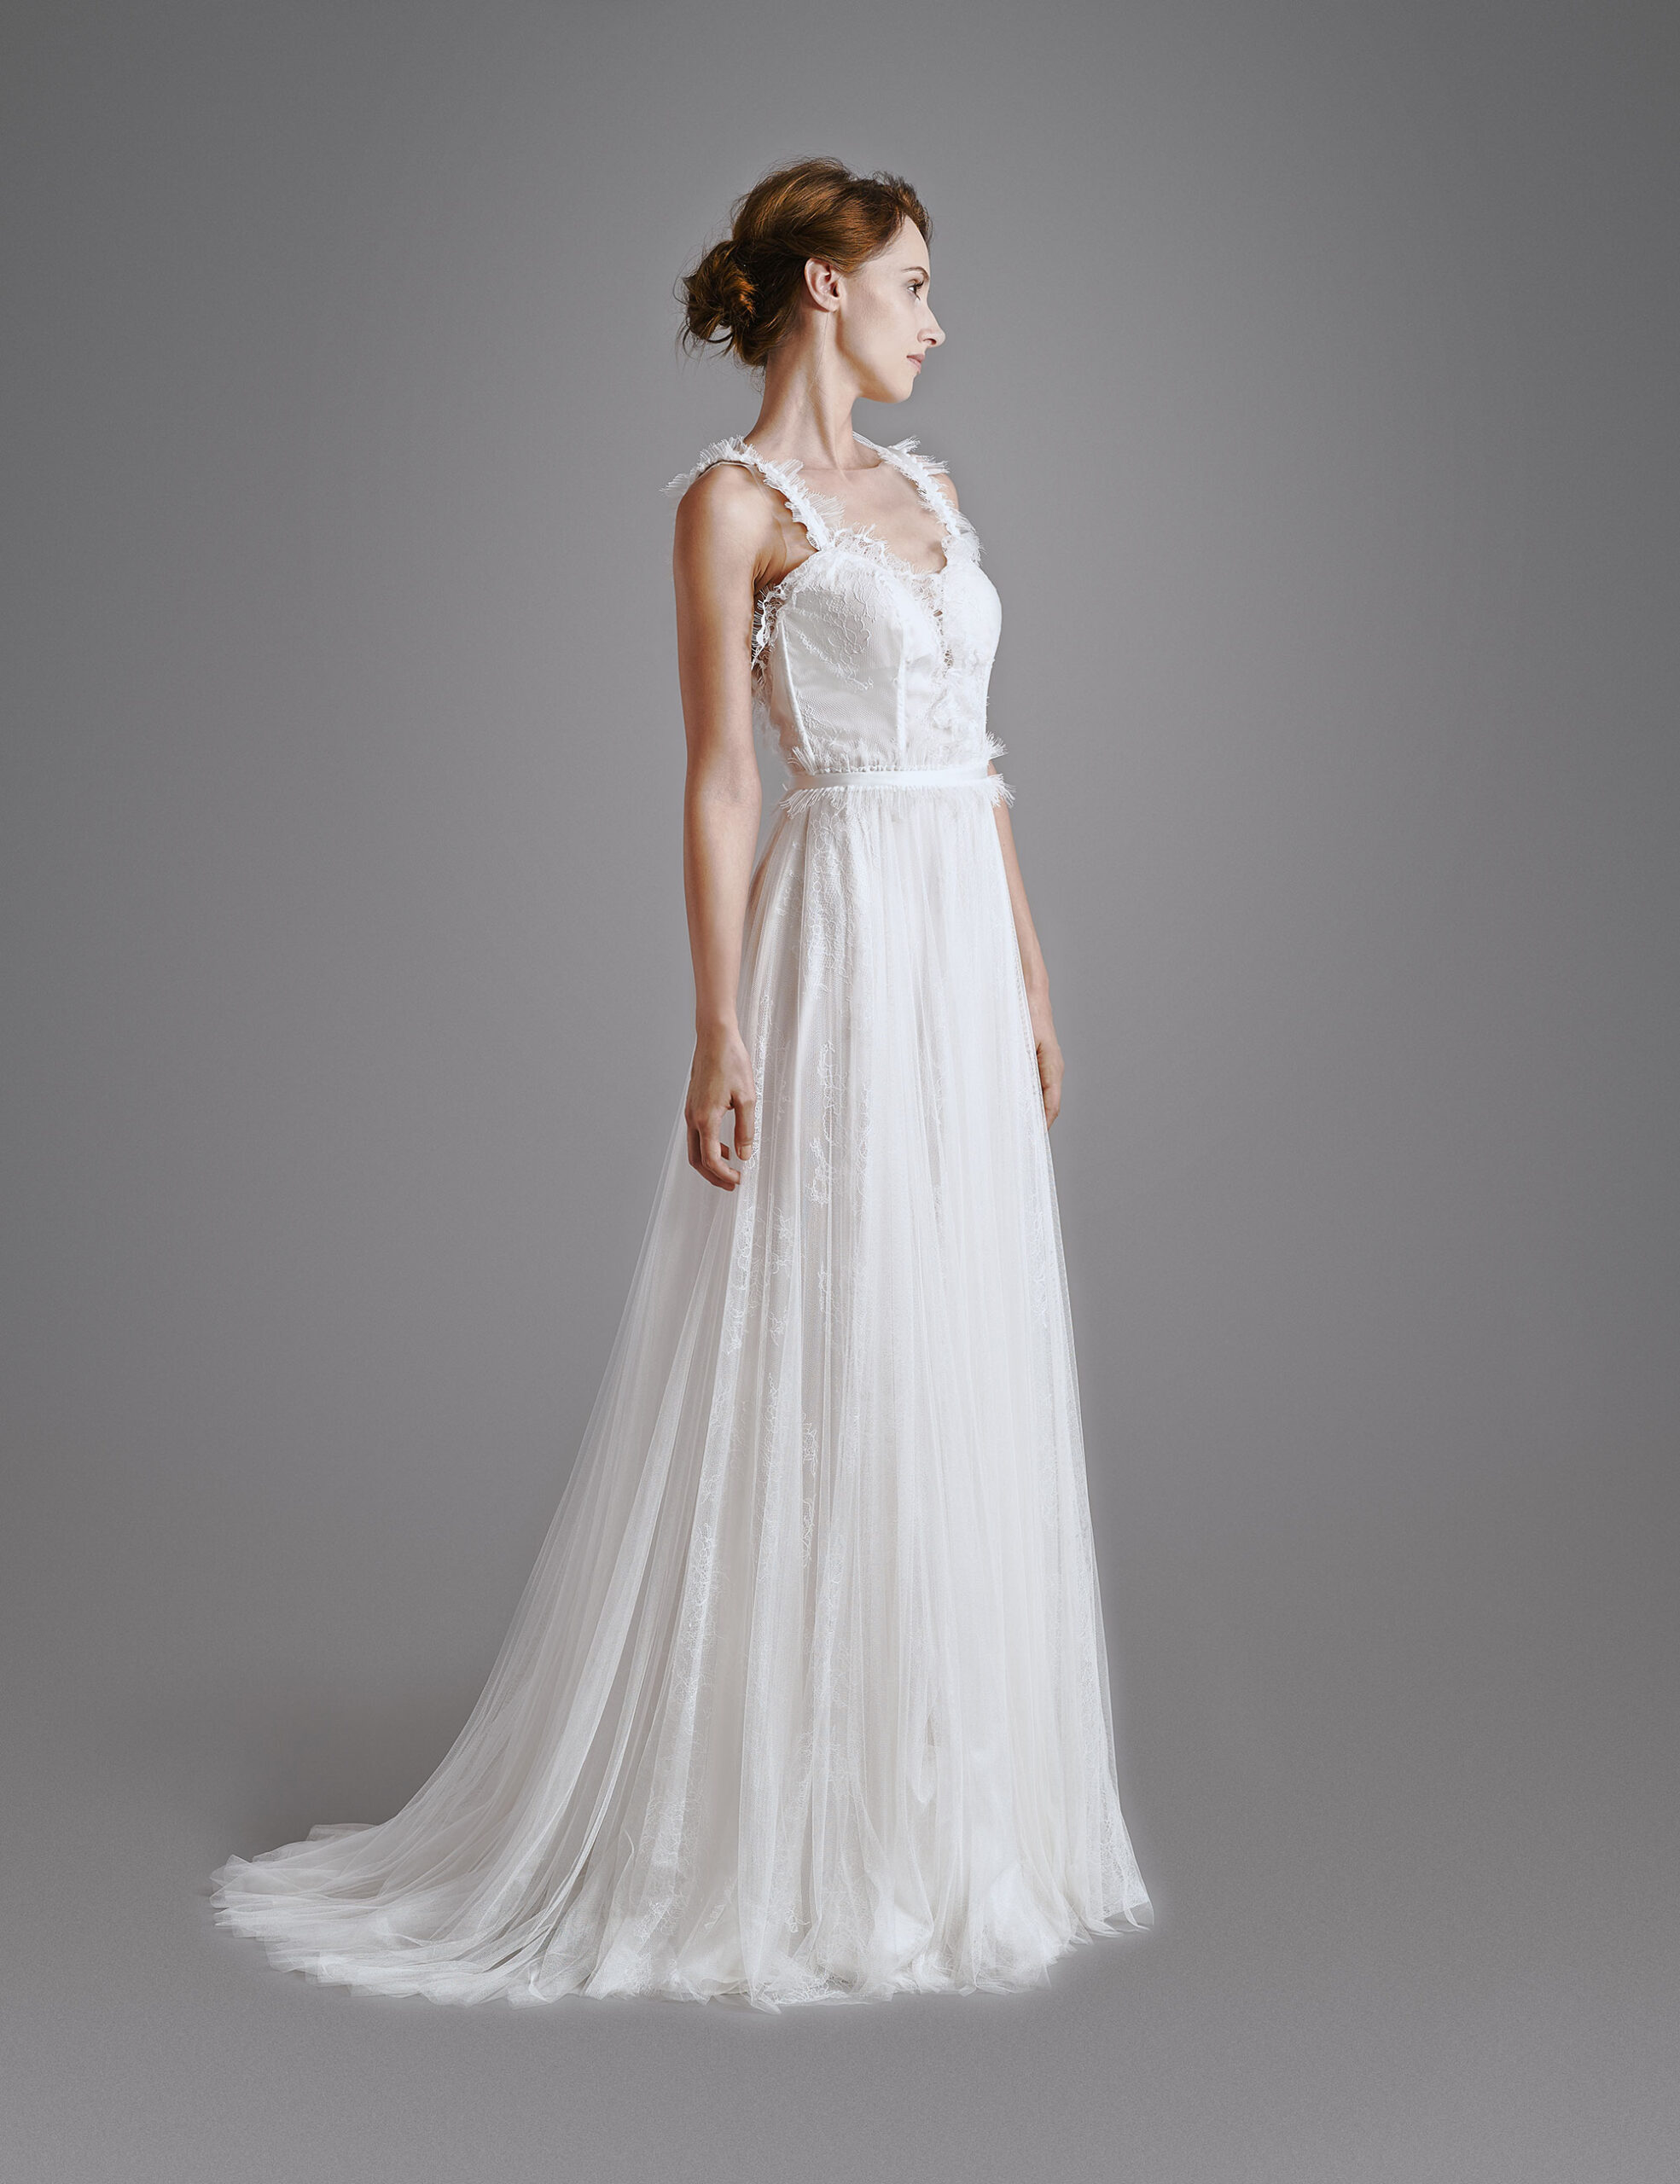 Romantic wedding dress WILLOW BUTERFLY BHARB-WILLOW-BUTTERFLY-BH2020-0005-003-tall